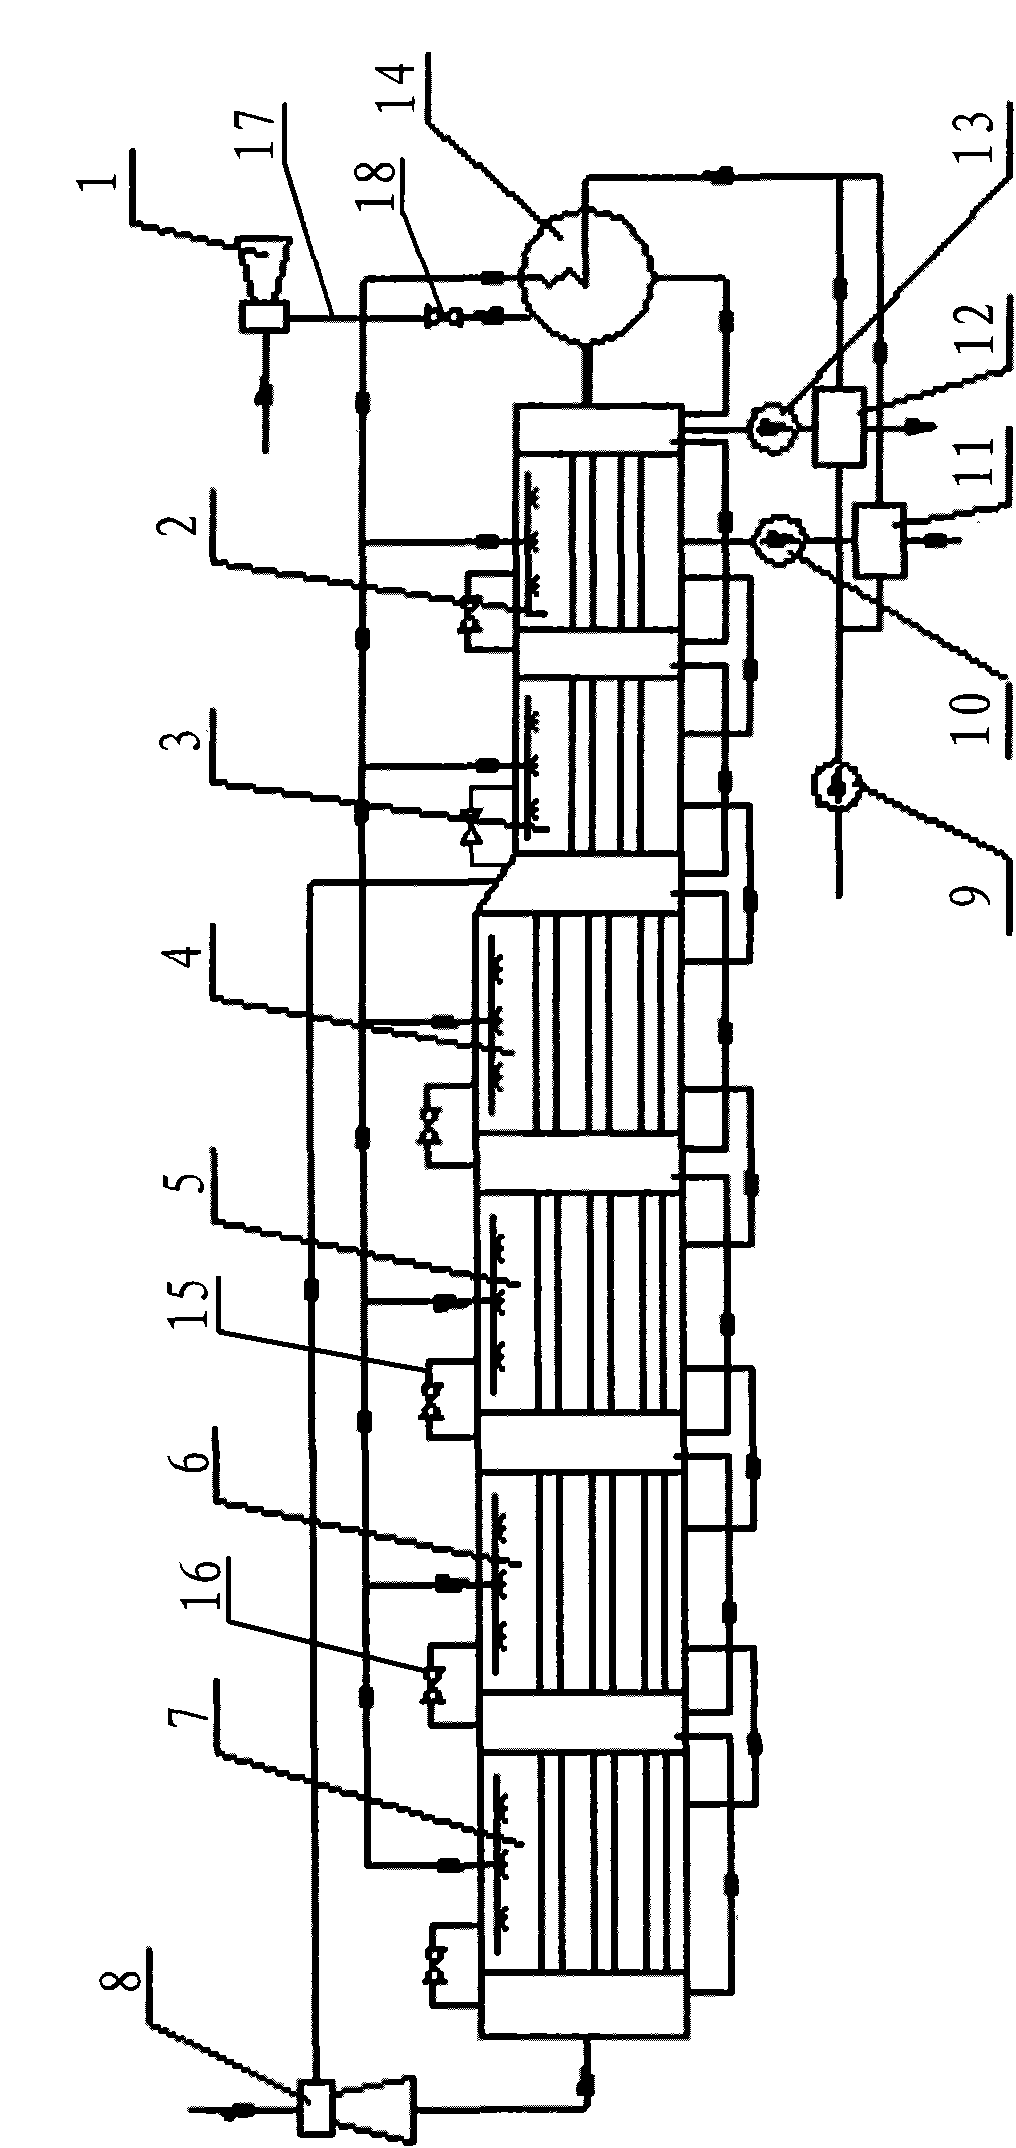 'Outside-cylinder series-connection type' non-condensable gas removing device in low-temperature multi-effect distillation seawater desalination system